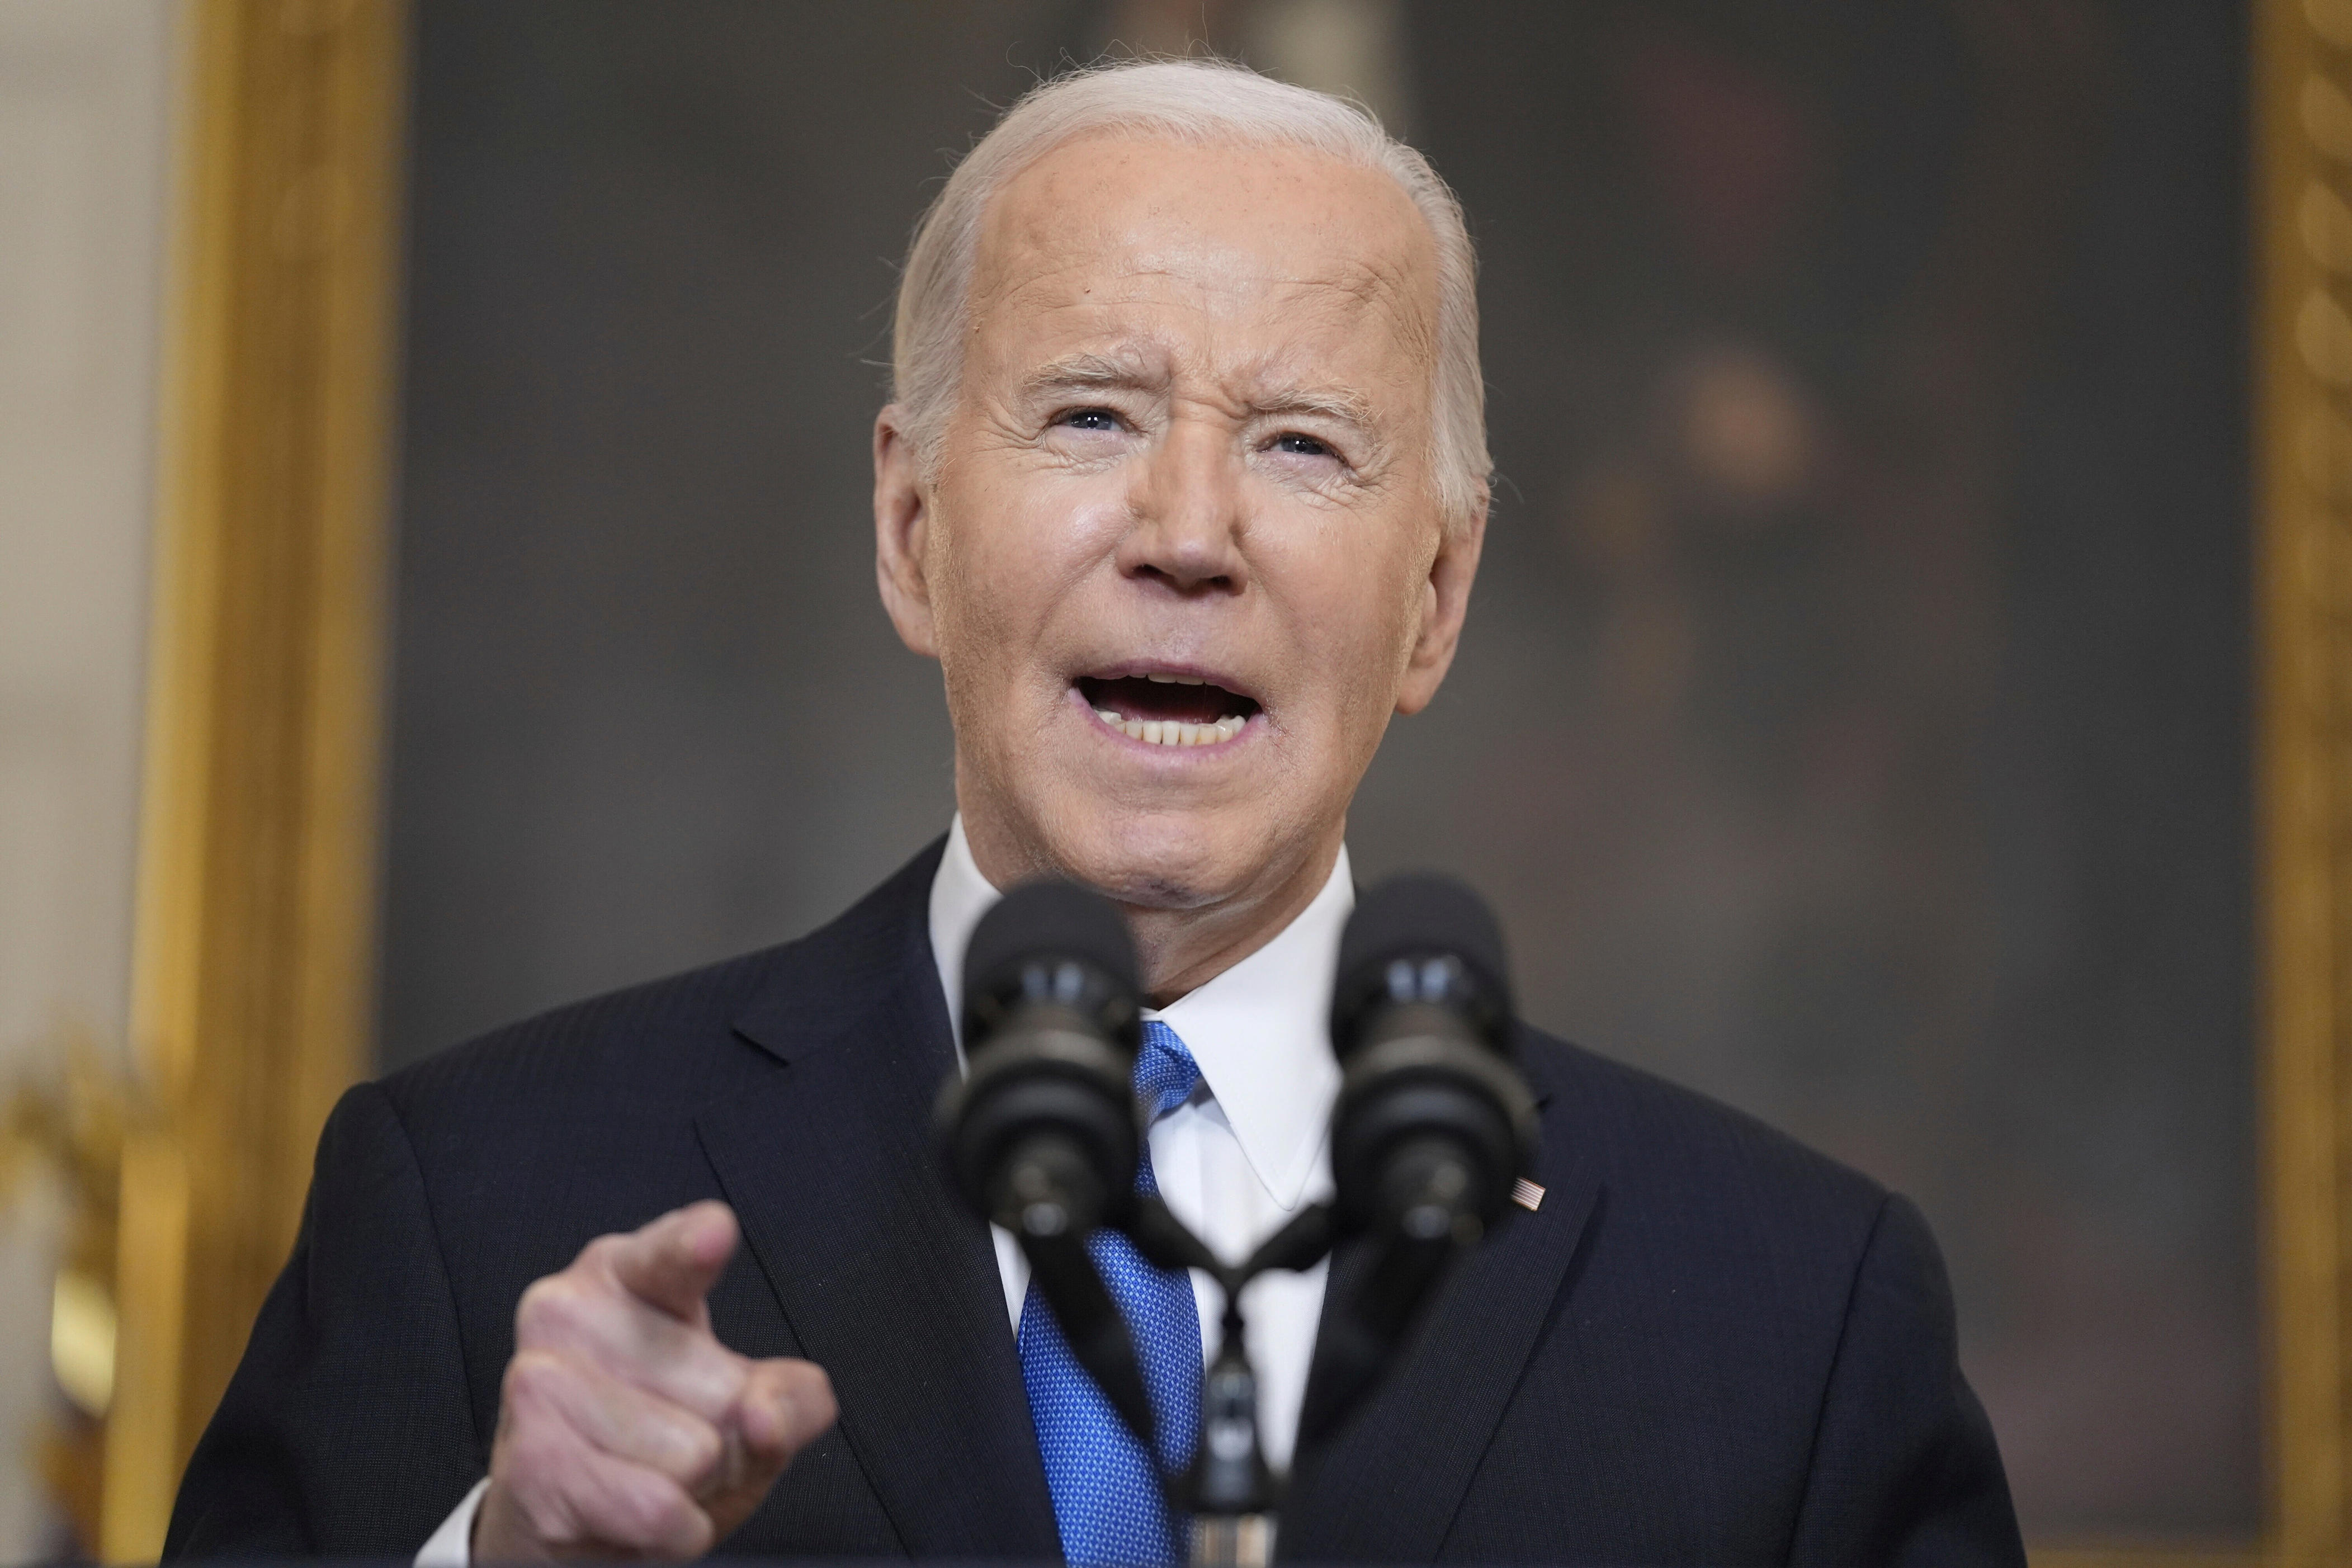 republicans always fall in line behind trump. why don't democrats do the same for biden?